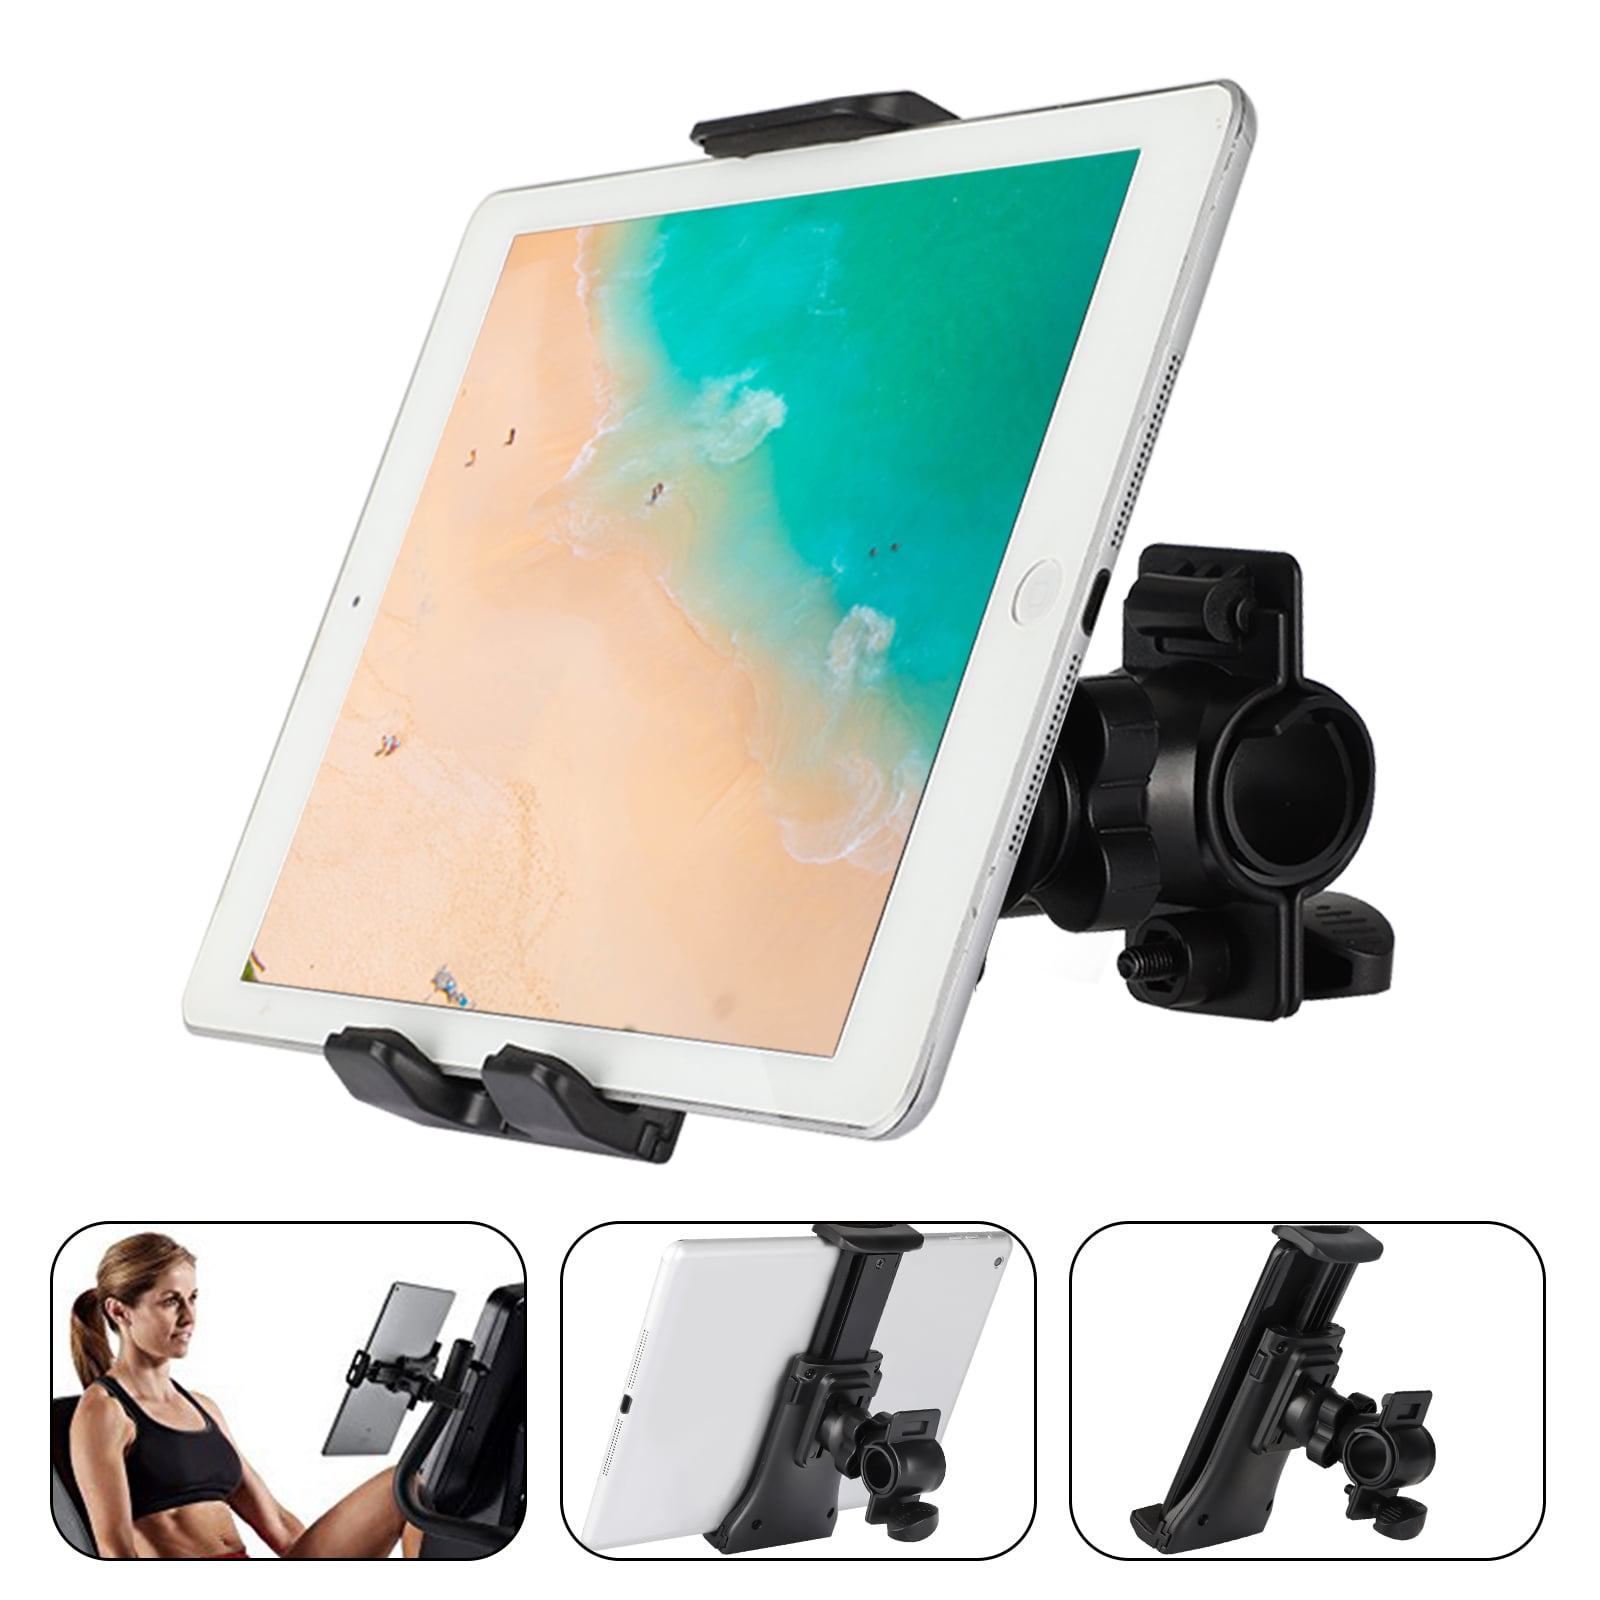 Headboard Treadmill Car Headrest Mount & More Bike Flexible Tablet Mount and Smartphone Stand Holder for Bedside Desk Spinning Bicycles